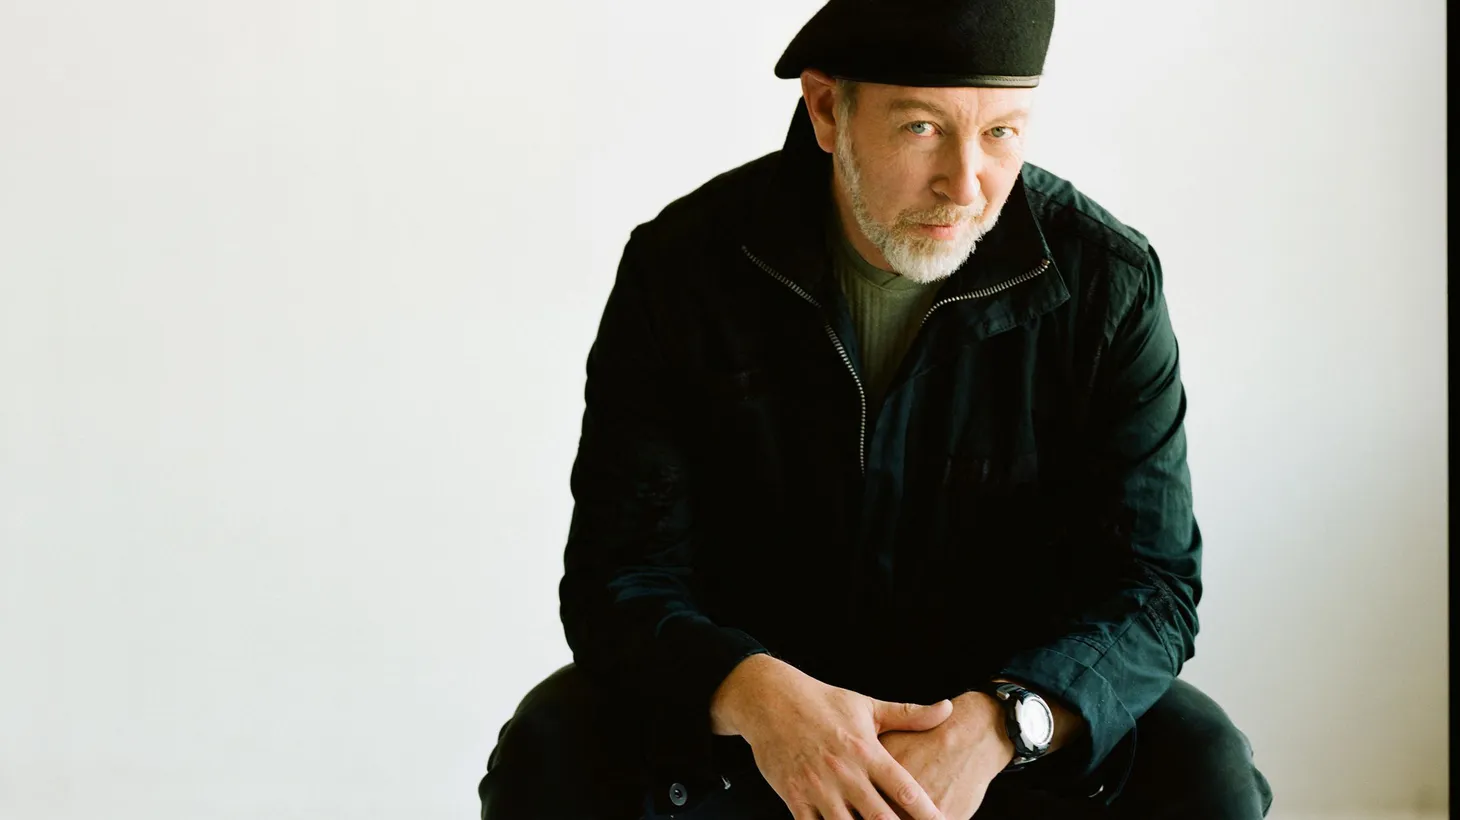 Rolling Stone magazine ranked Richard Thompson one of the 20 best guitar players of all time. He's also one of Britain's finest singer-songwriters...